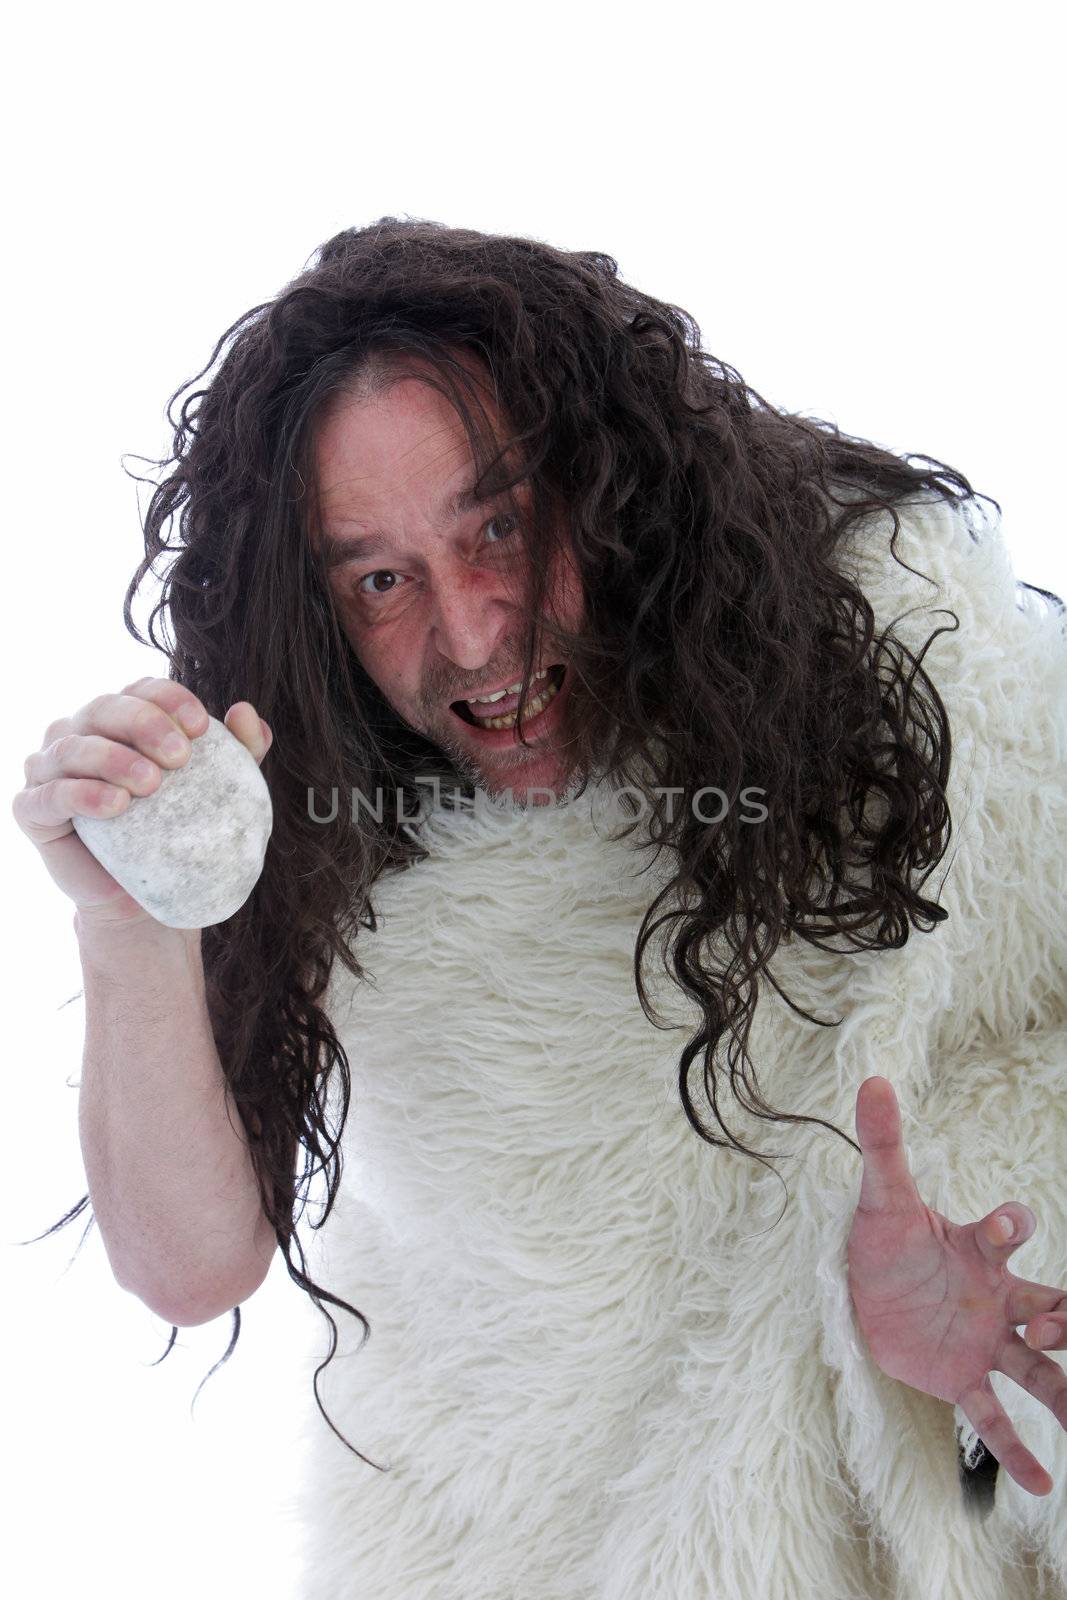 Threatening primitive savage stoneage man holding a rock up in his hand in a threatening gesture, humorous portrait of a long haired man clad in a animal fur isolated on white